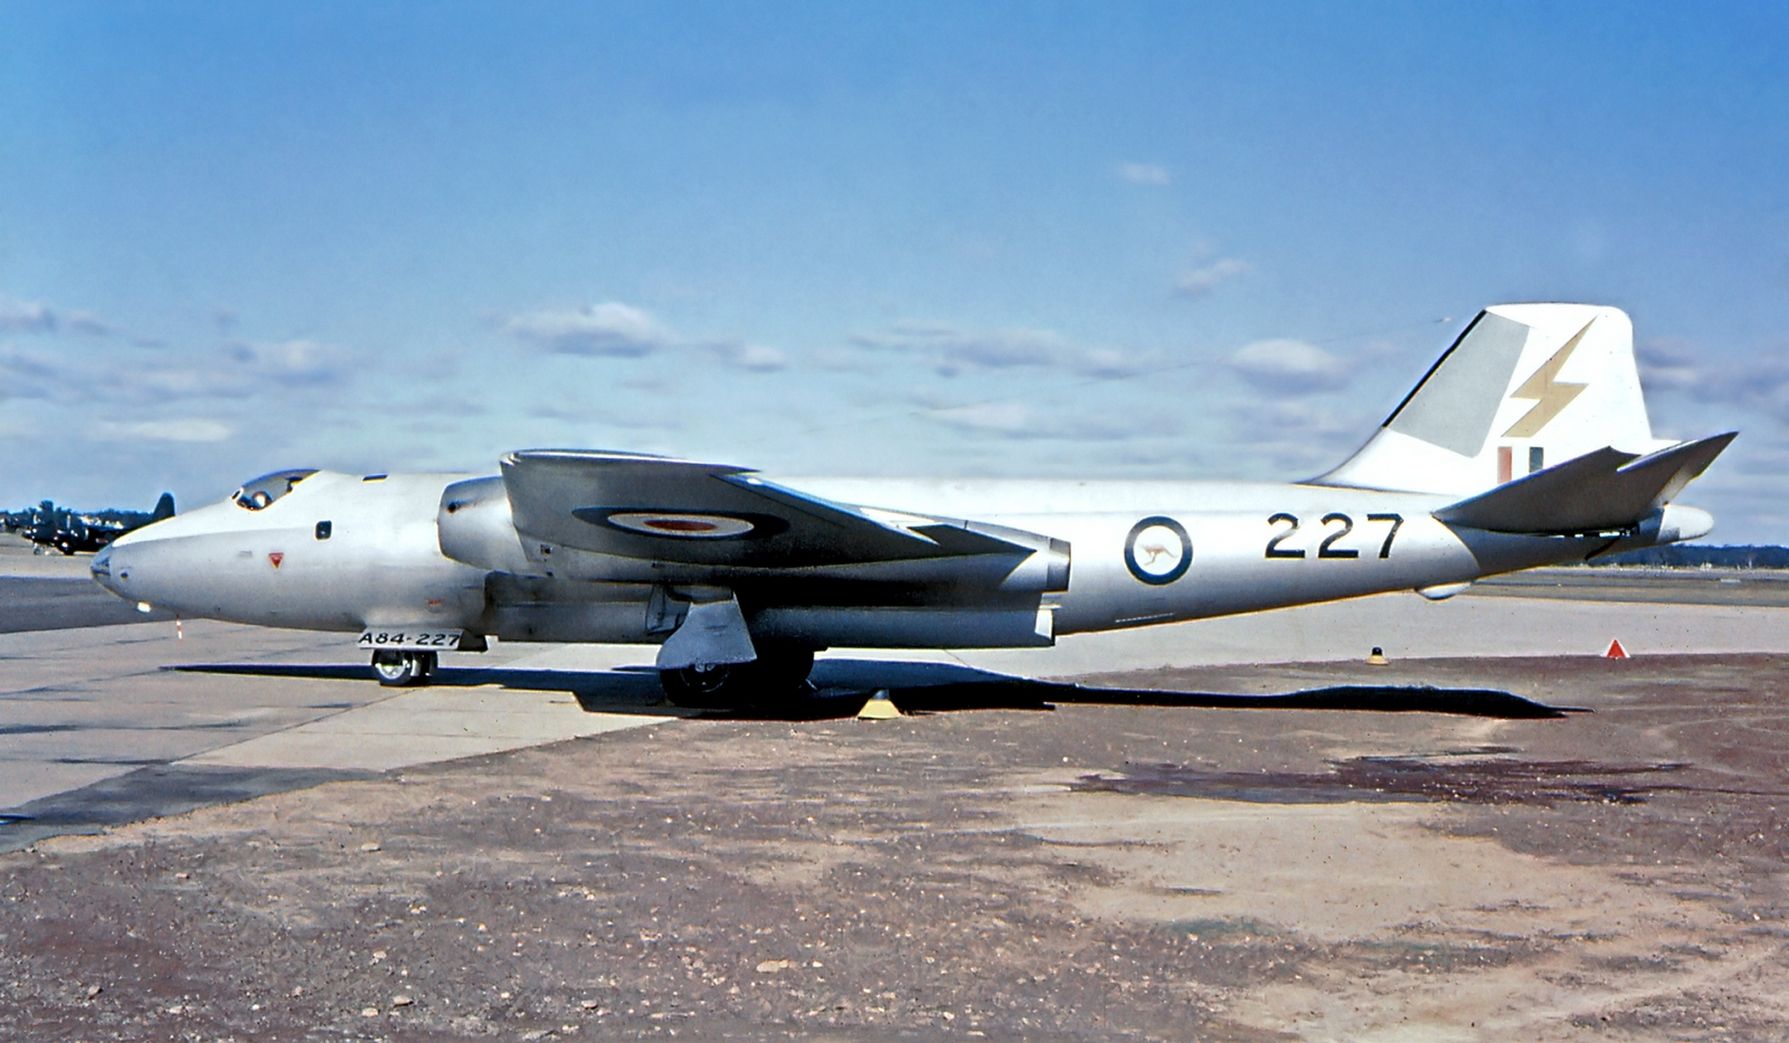 An English Electric Canberra bomber on an airfield apron.